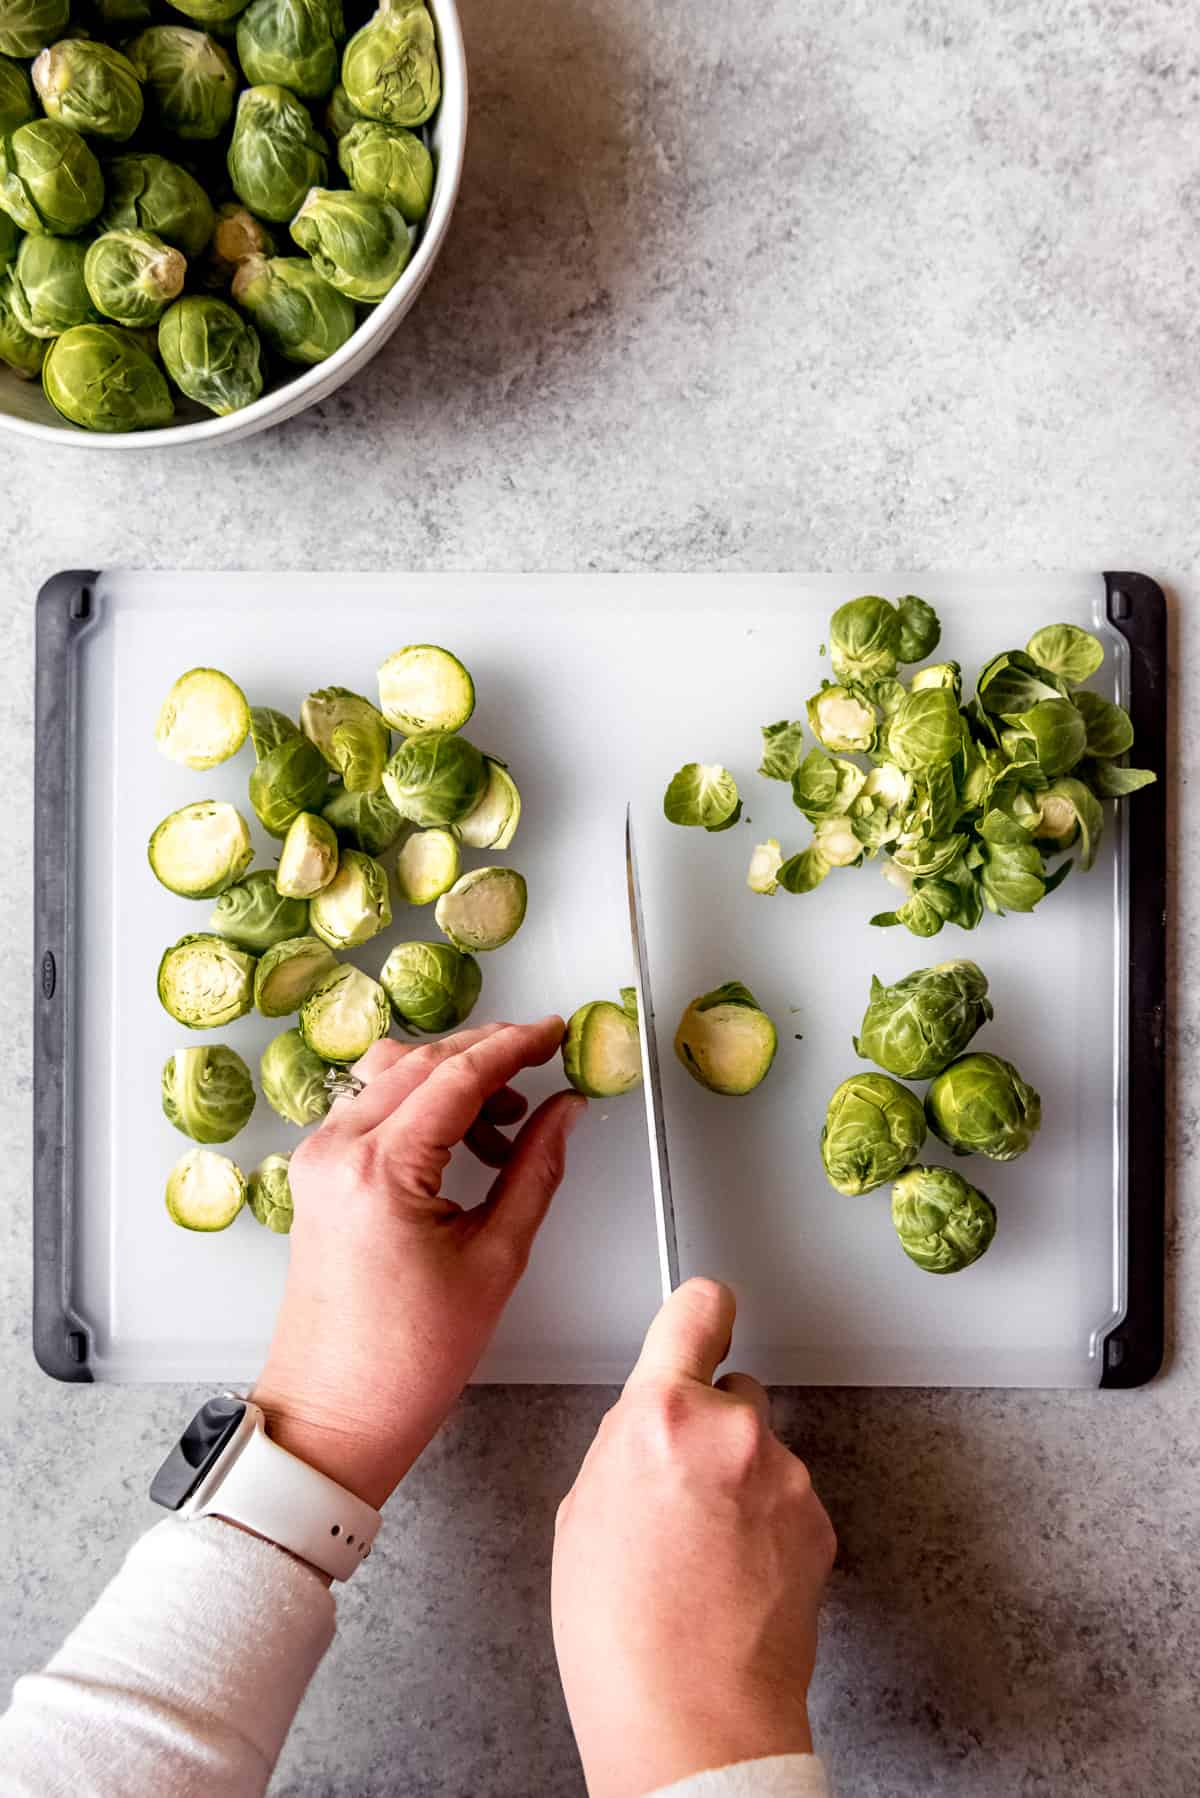 Slicing brussels sprouts in half on a cutting board.